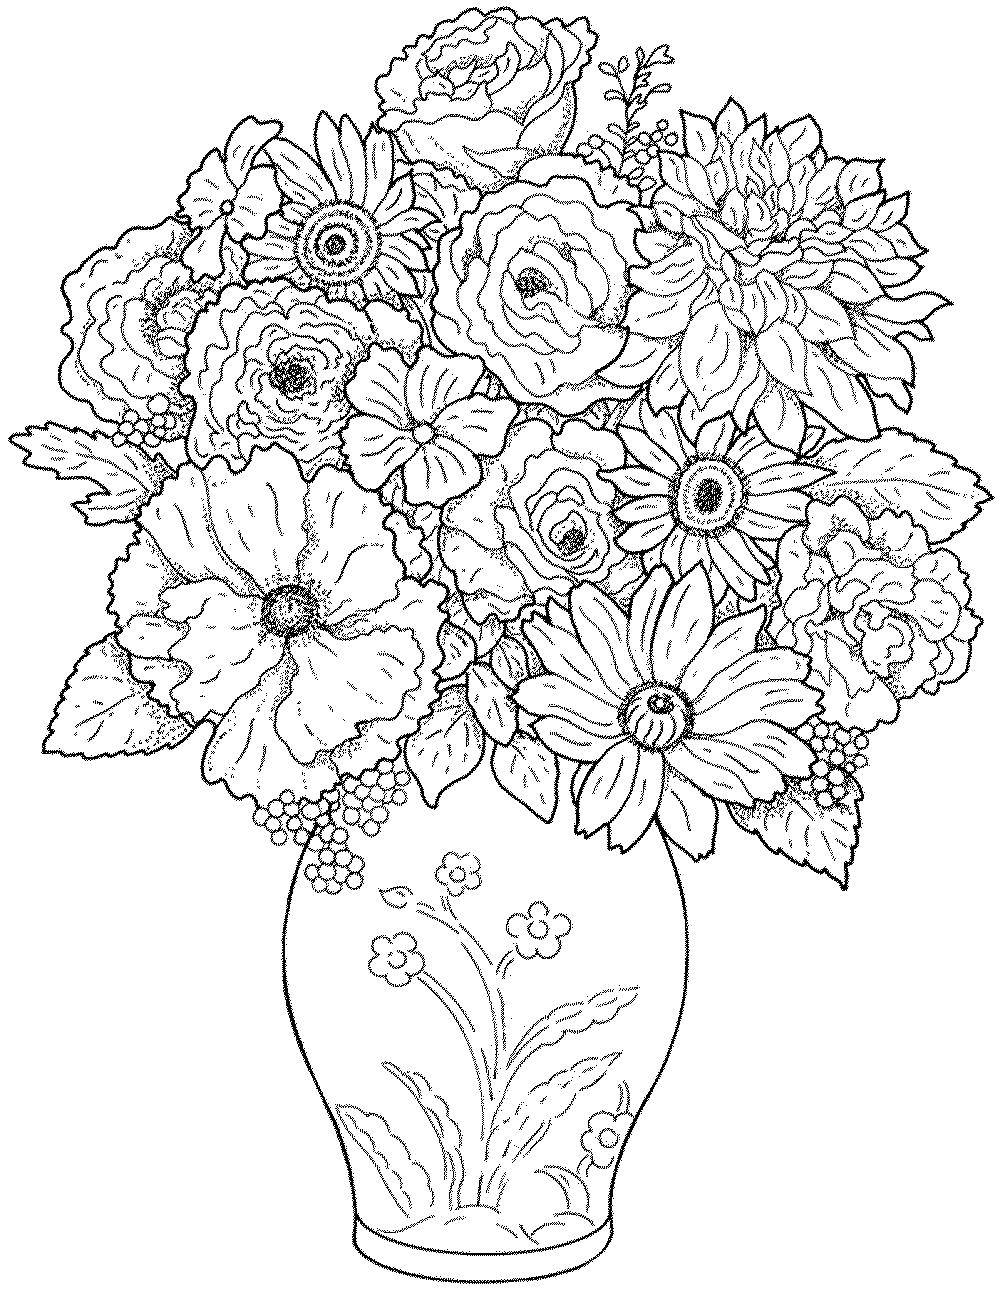 Coloring Vase with a wonderful bouquet of color. Category flowers. Tags:  Flowers, bouquet, vase.